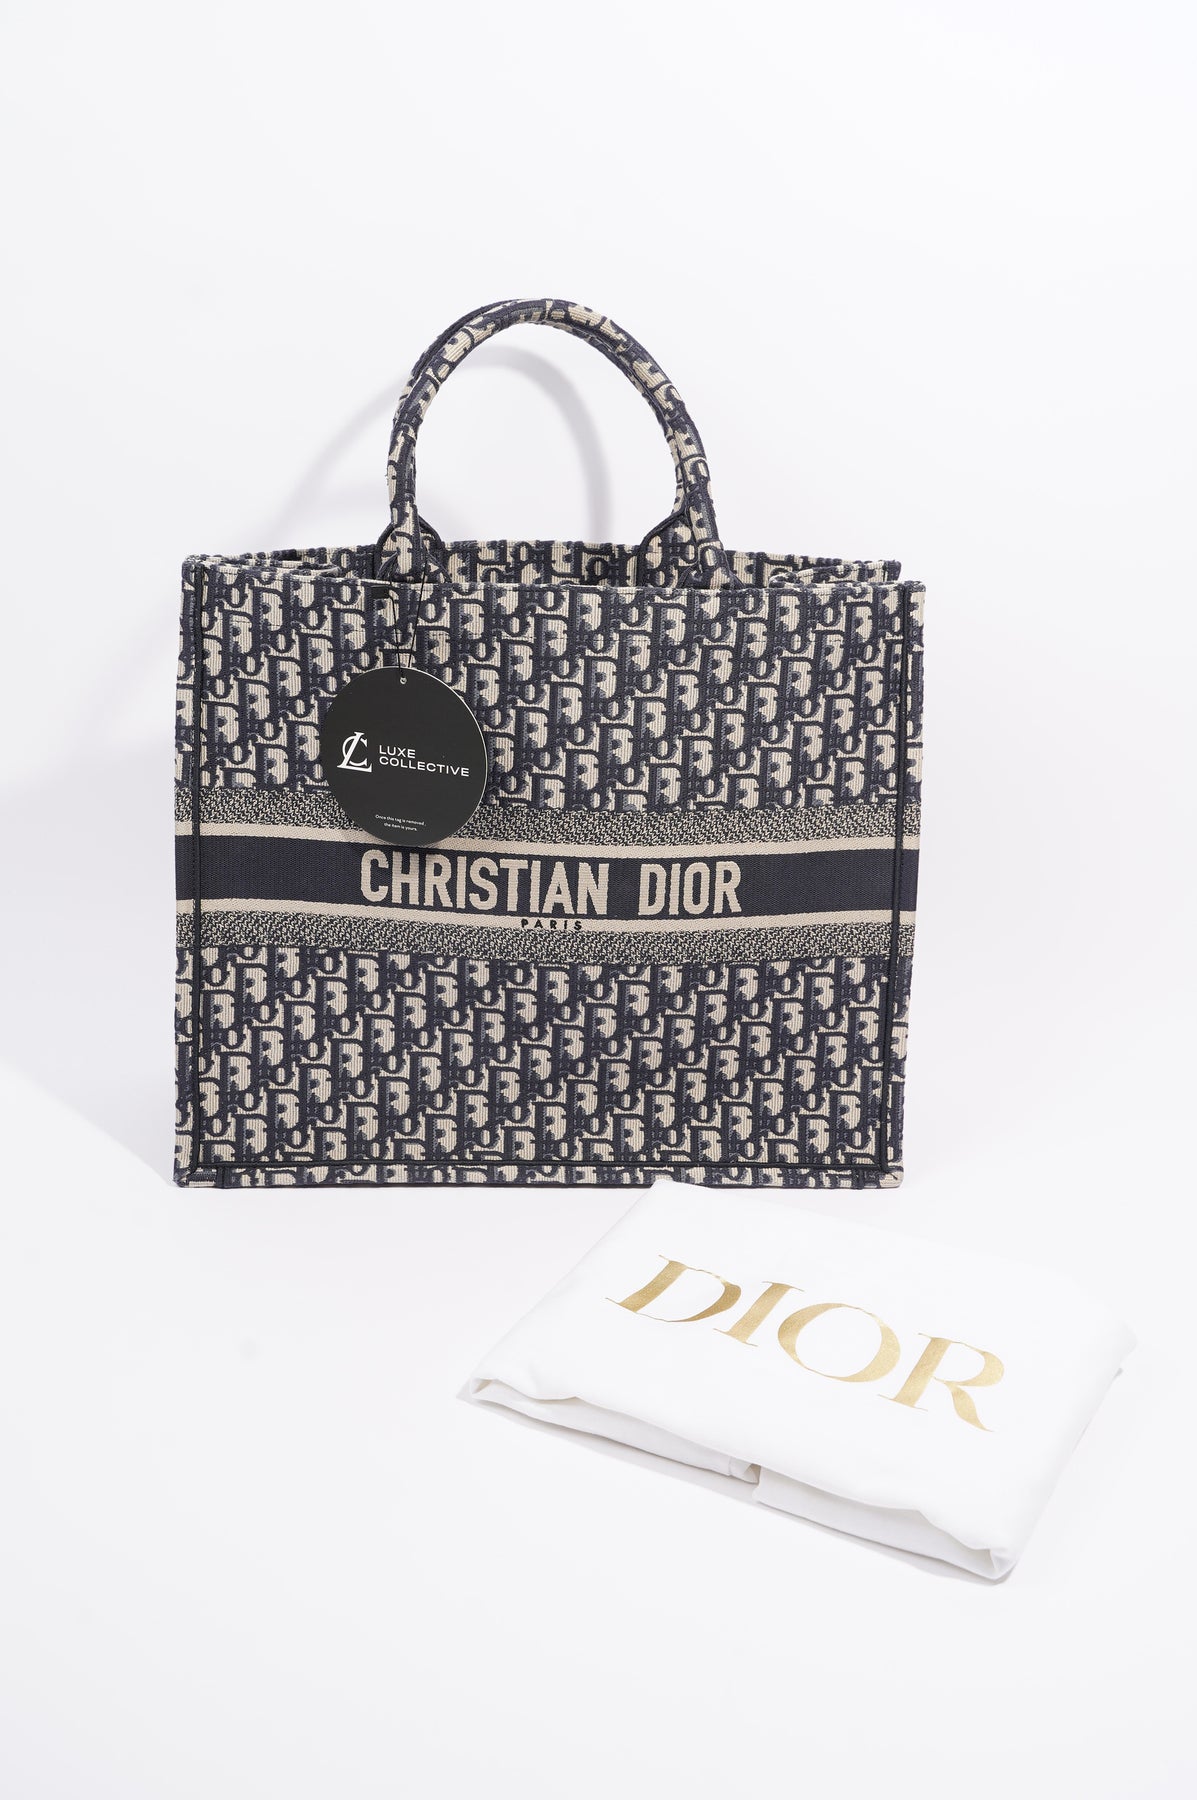 Christian Dior Book Tote Large Tote Bag in Canvas, Hardware